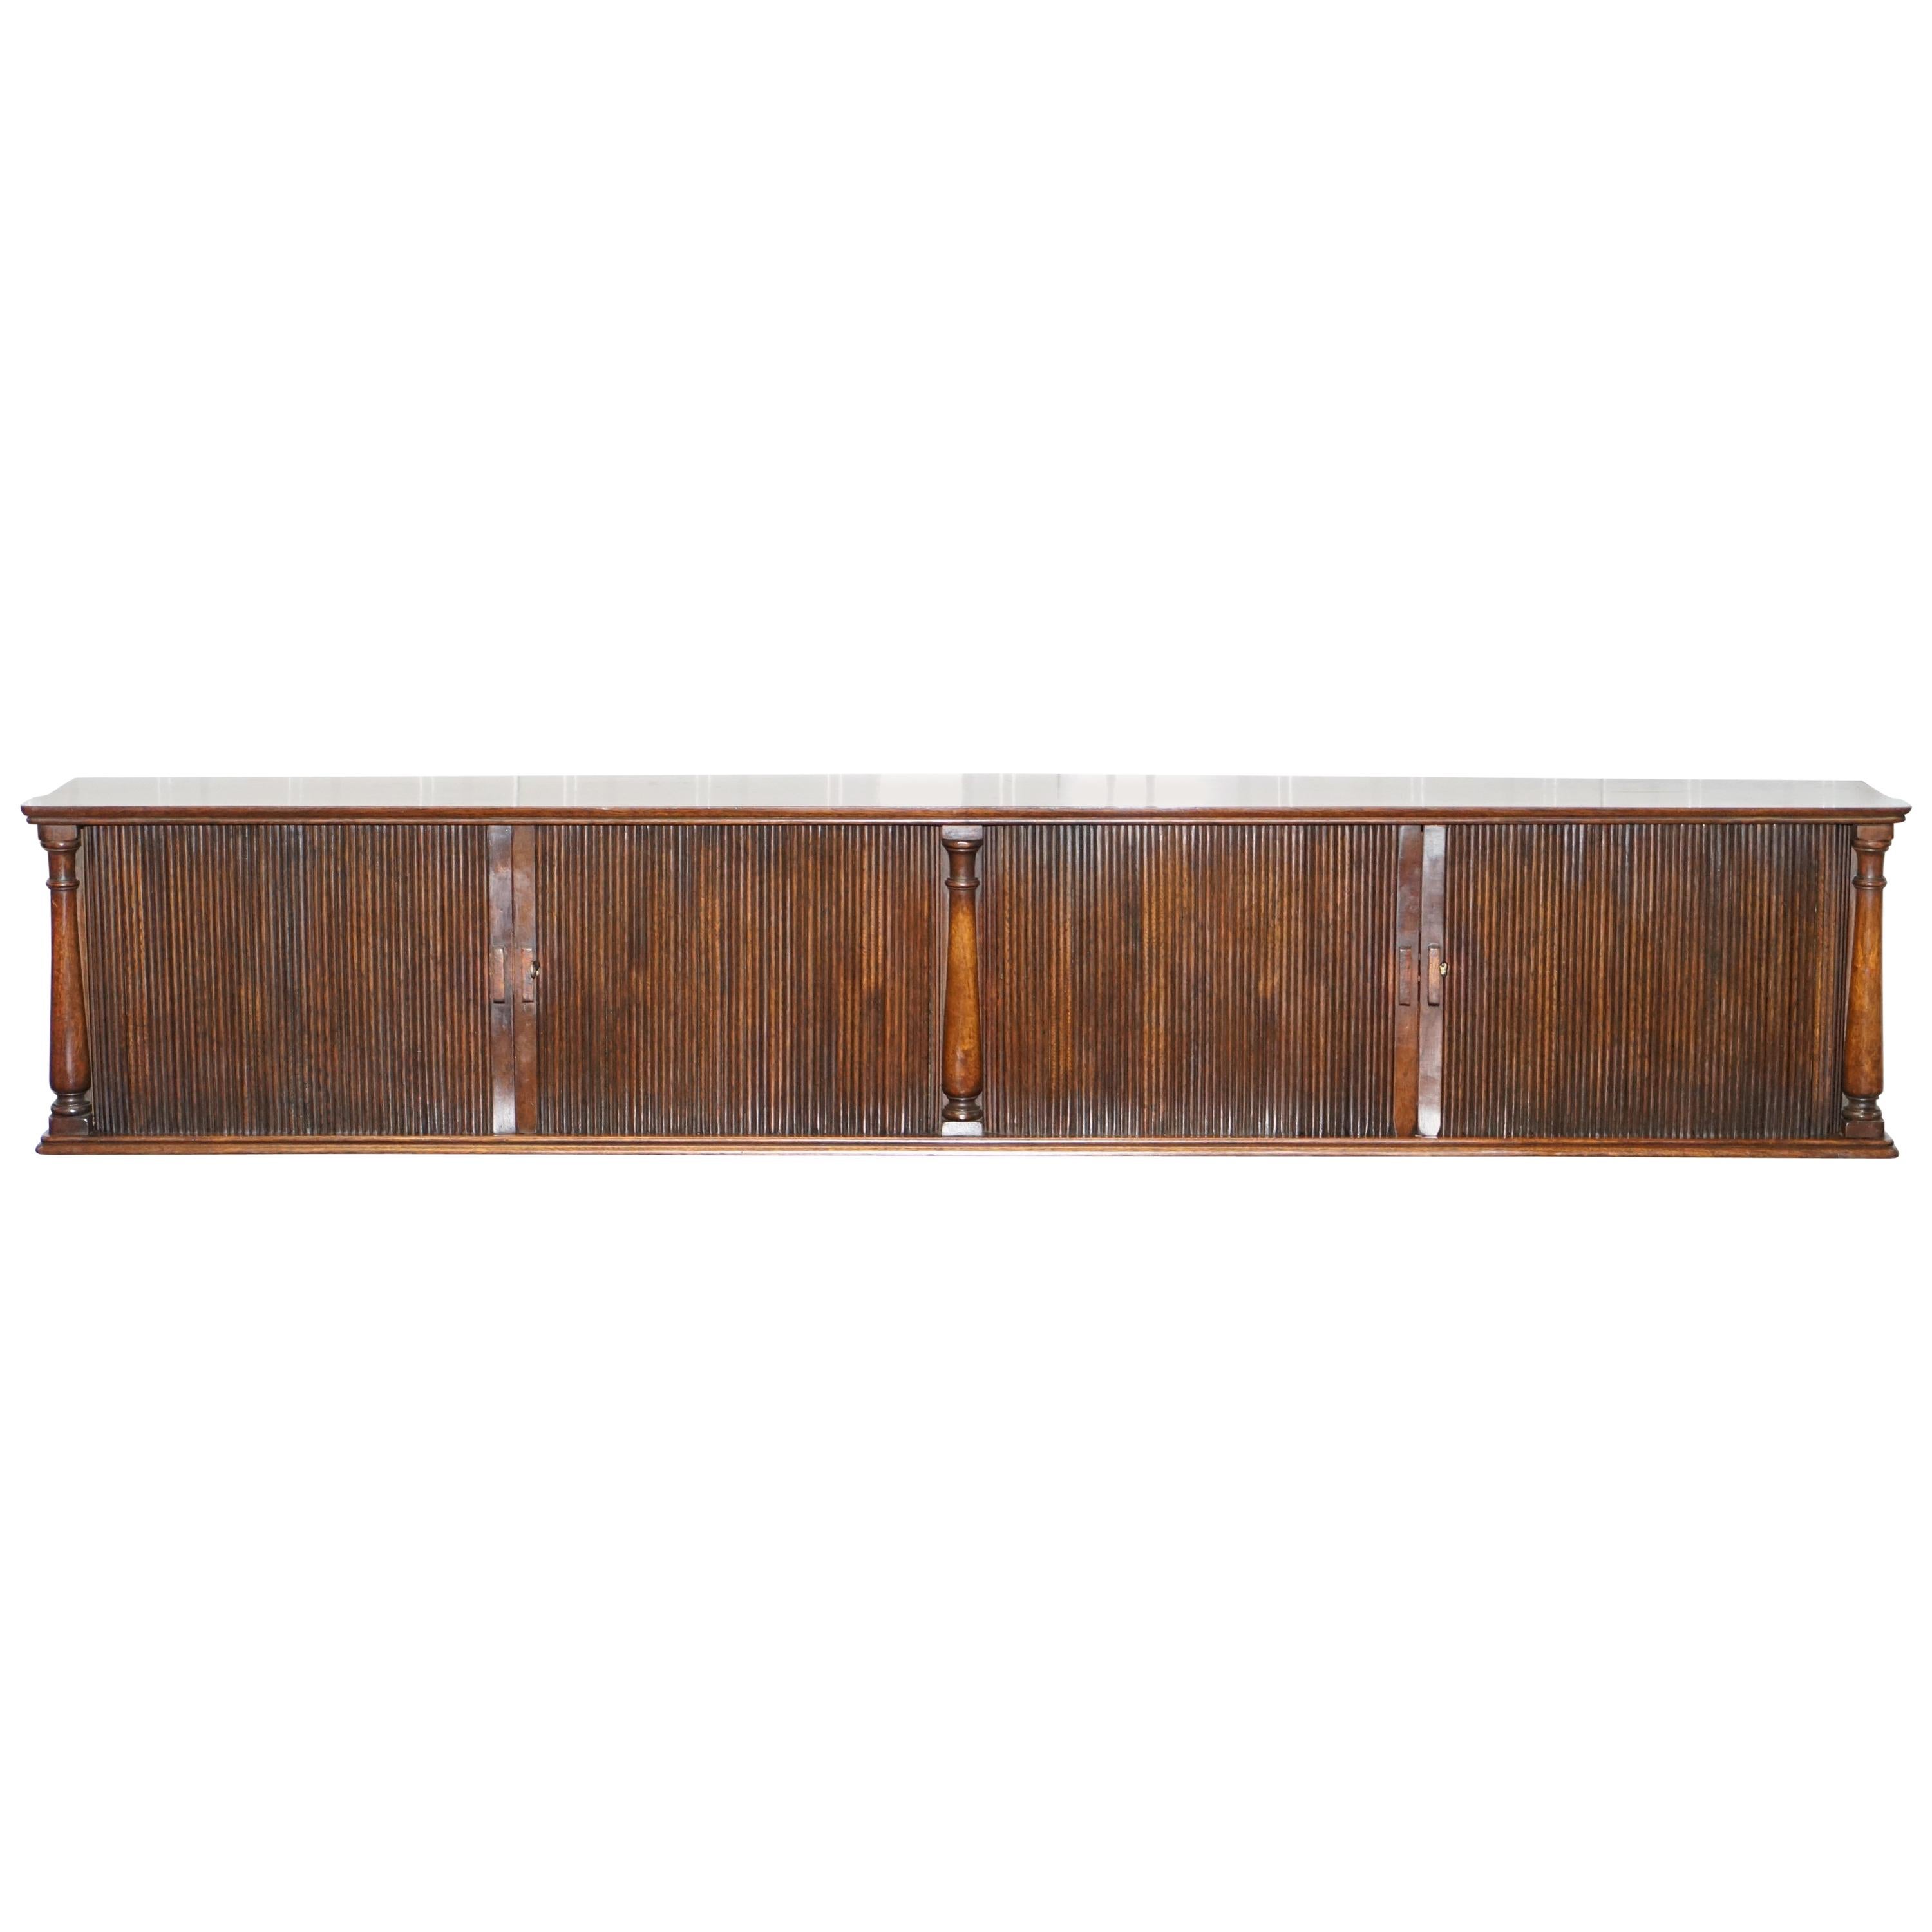 Rare Tambour Fronted Long Single Book Shelf, Desk / Tabletop or Wall-Mounted